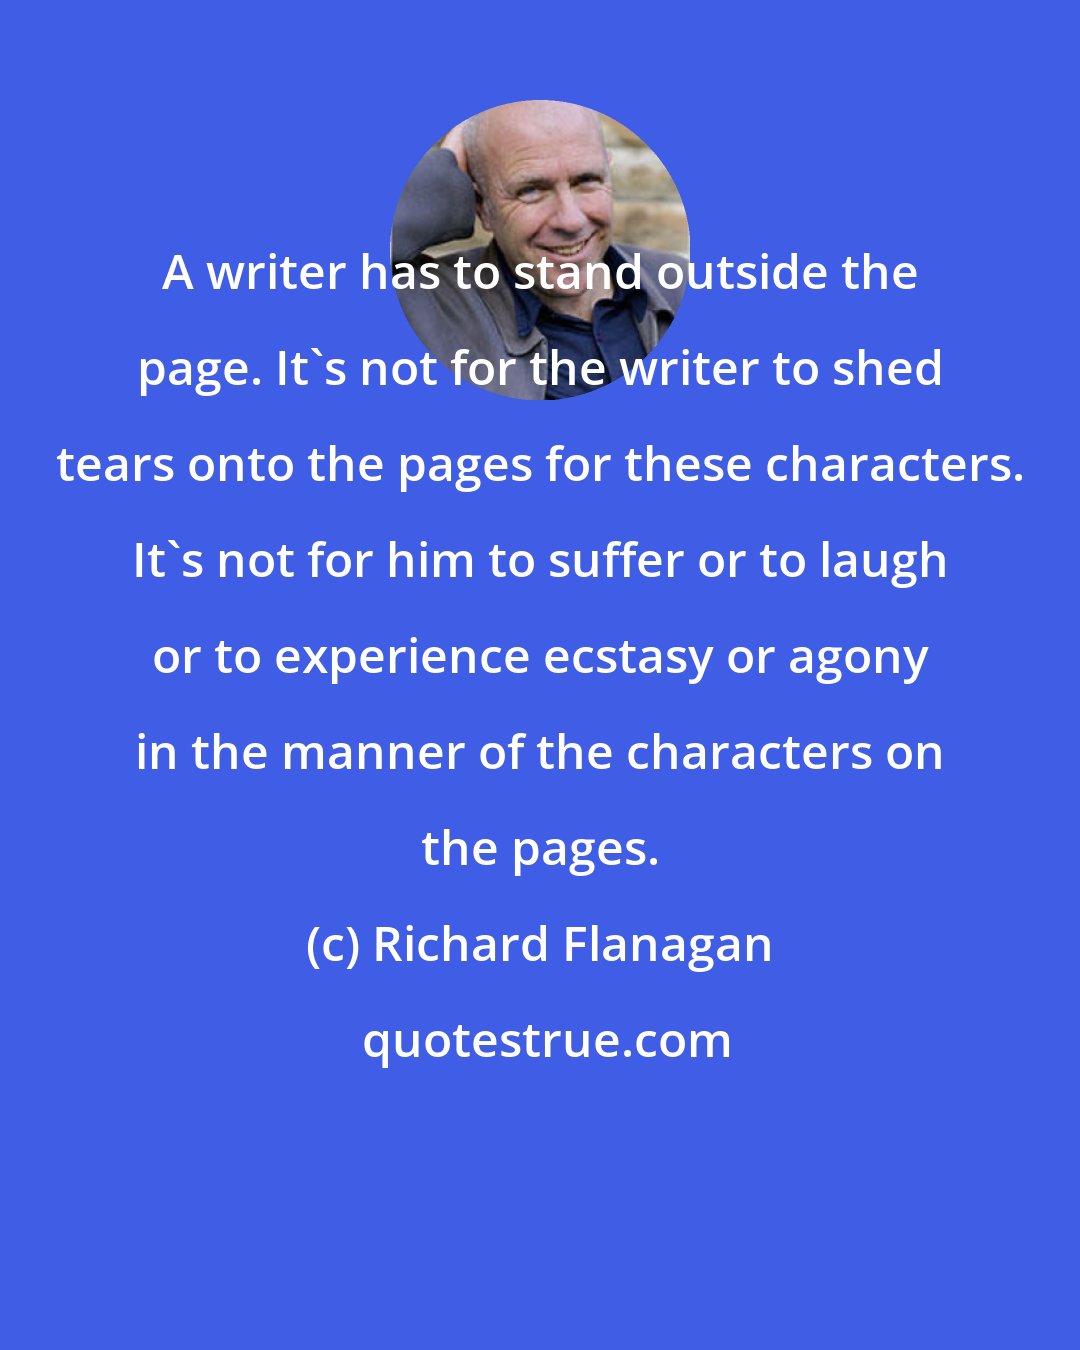 Richard Flanagan: A writer has to stand outside the page. It's not for the writer to shed tears onto the pages for these characters. It's not for him to suffer or to laugh or to experience ecstasy or agony in the manner of the characters on the pages.